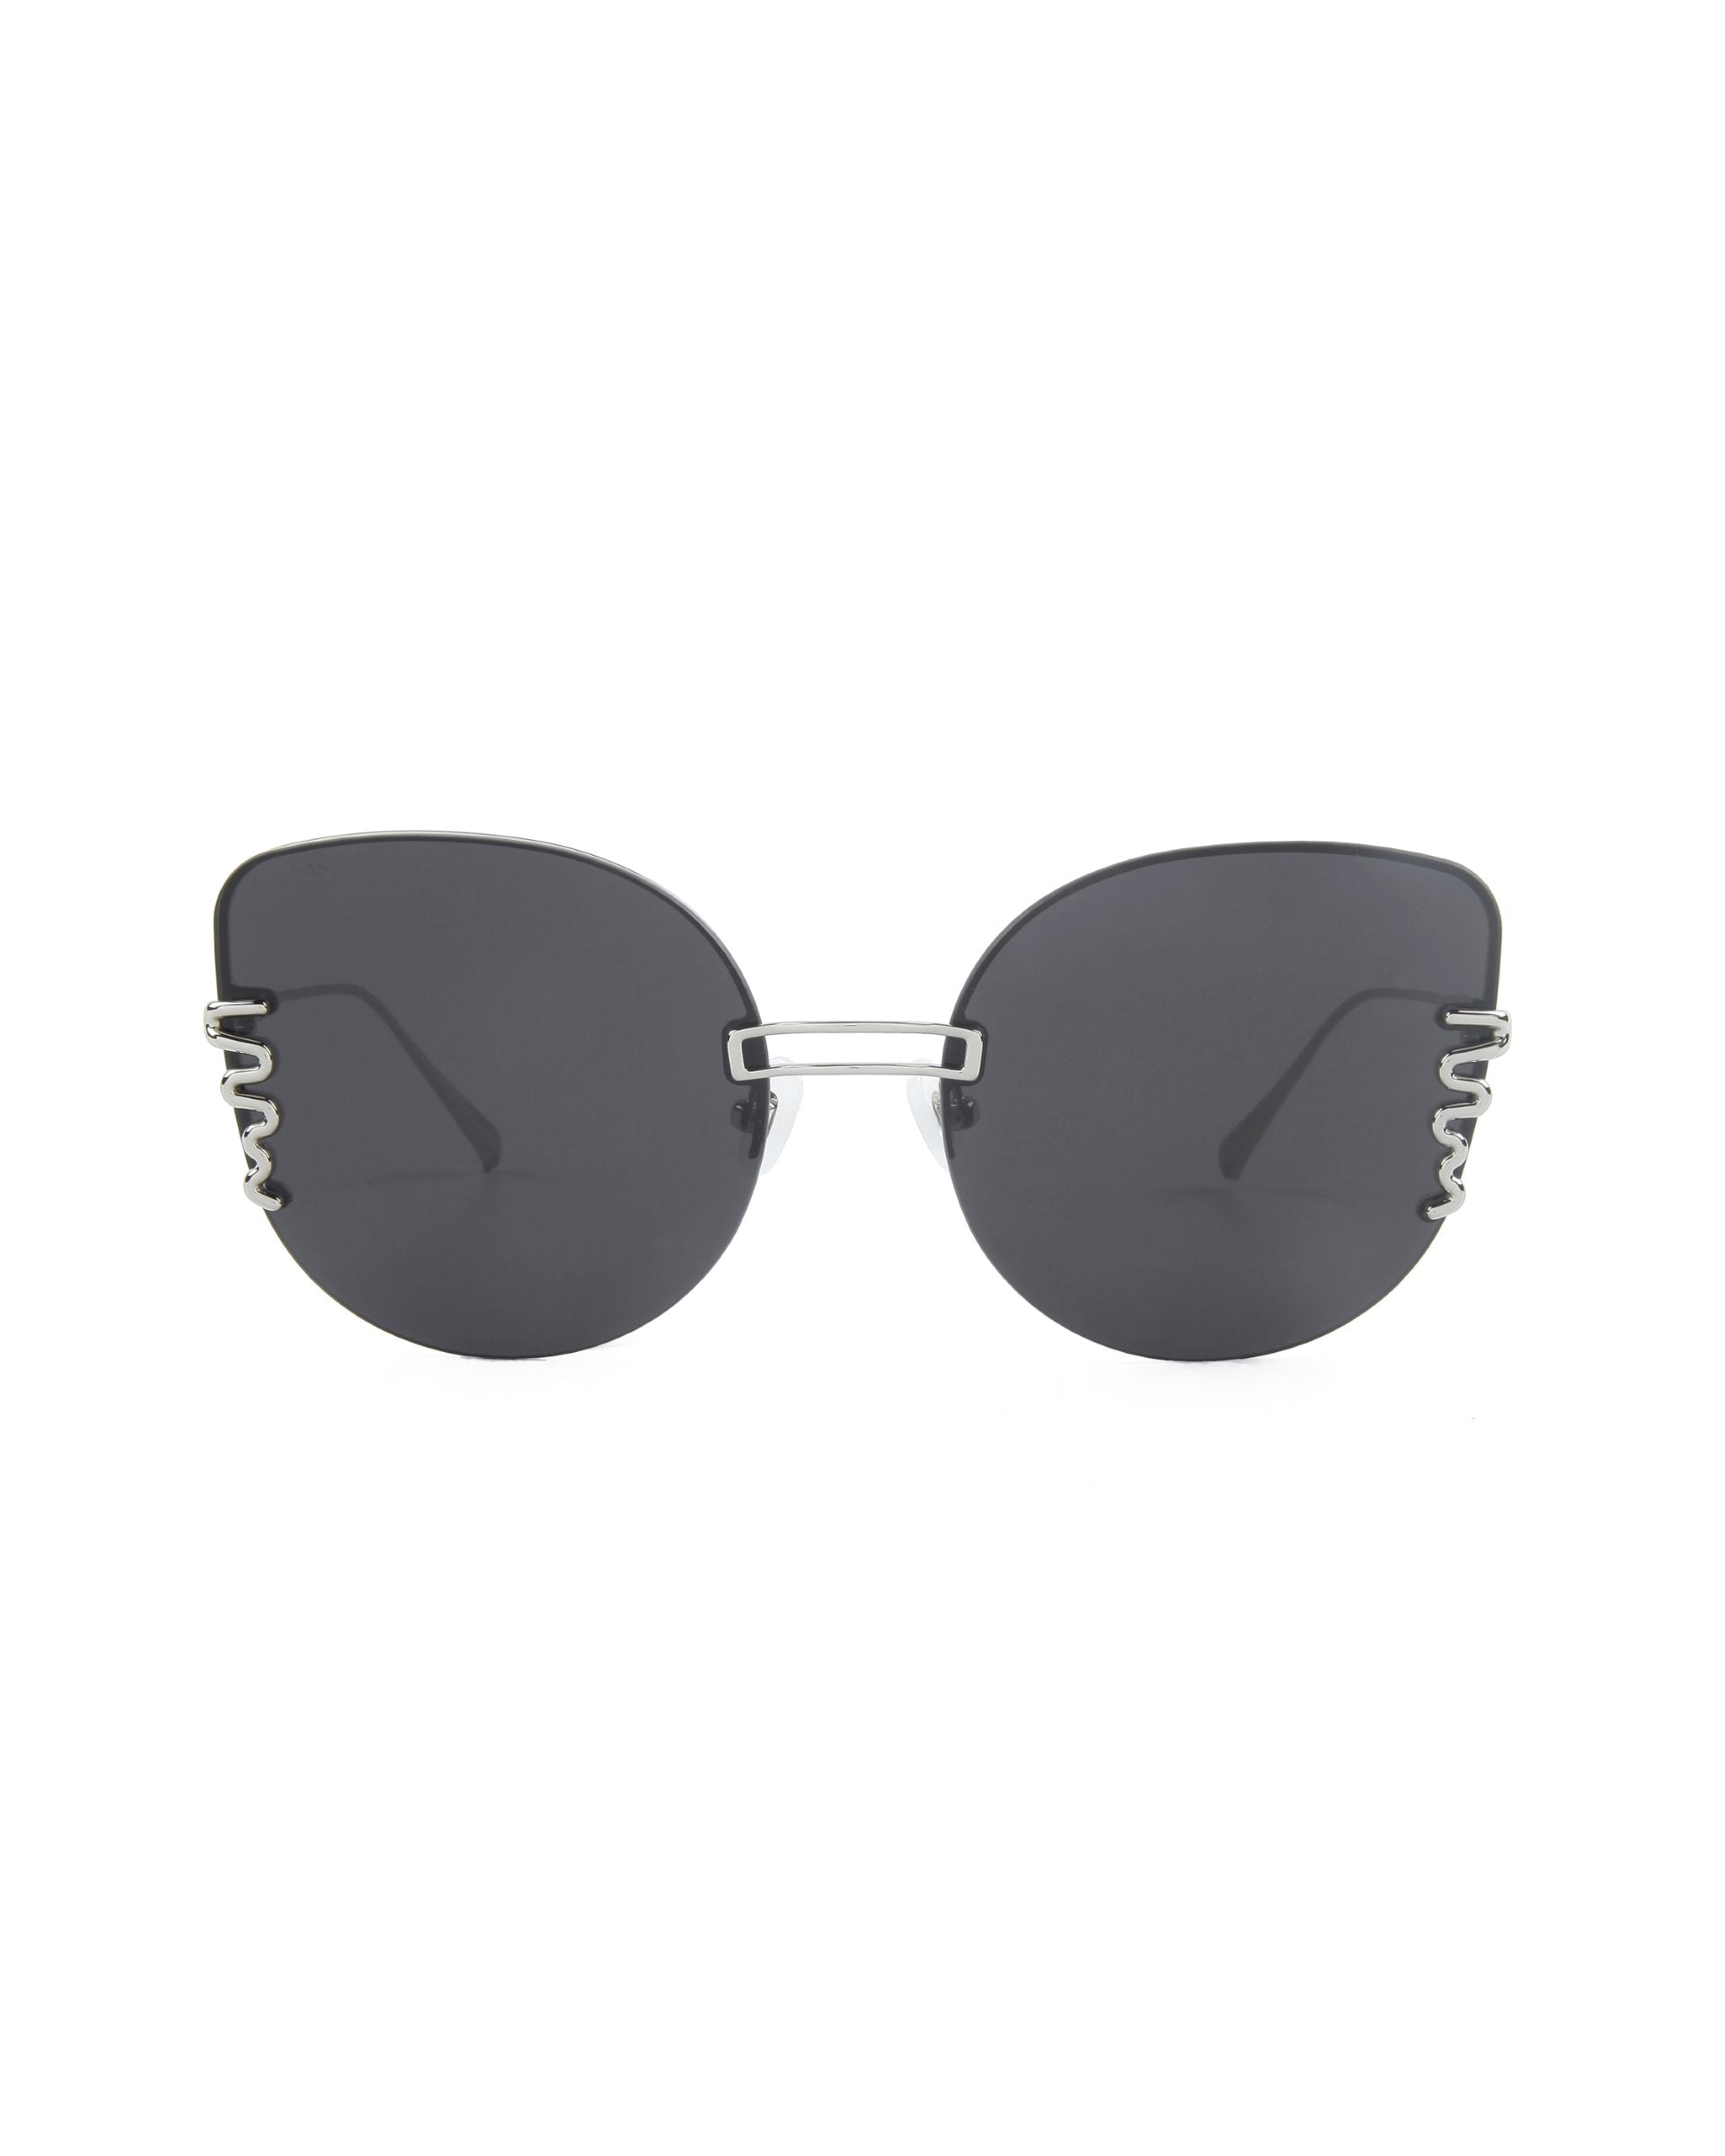 A pair of stylish, oversized cat-eye sunglasses with dark lenses and a unique frame design. The frames feature a silver metal bridge and decorative silver elements on the outer edges of the lenses, adding a touch of elegance to the overall minimalist look. Plus, they offer 100% UV protection. These are the Girlboss by For Art's Sake®.